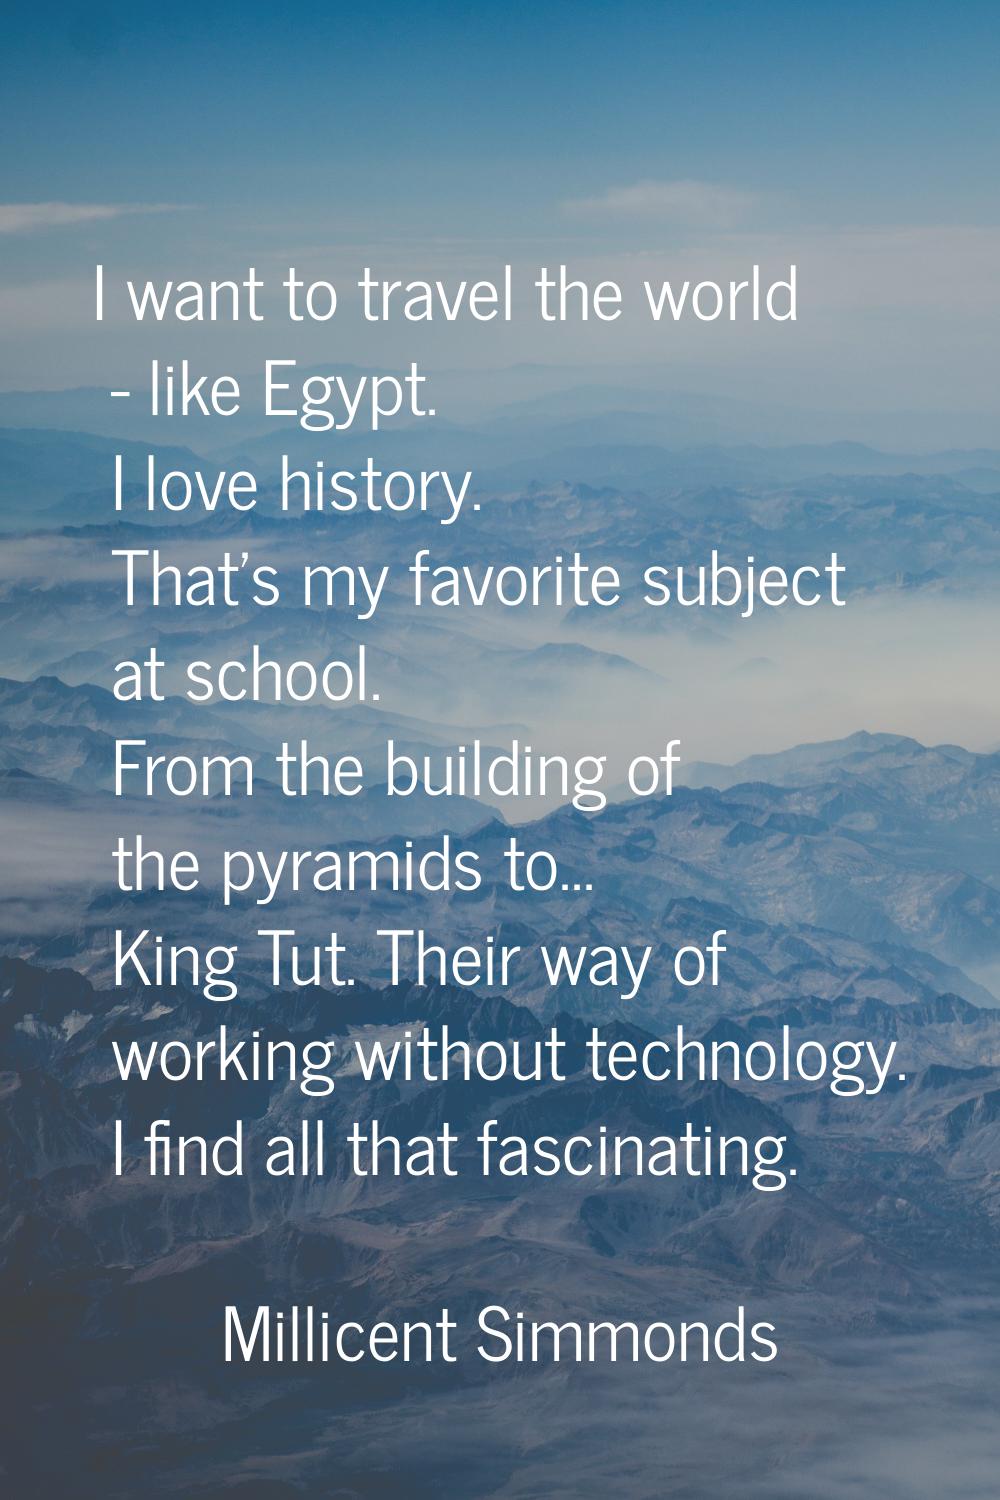 I want to travel the world - like Egypt. I love history. That's my favorite subject at school. From